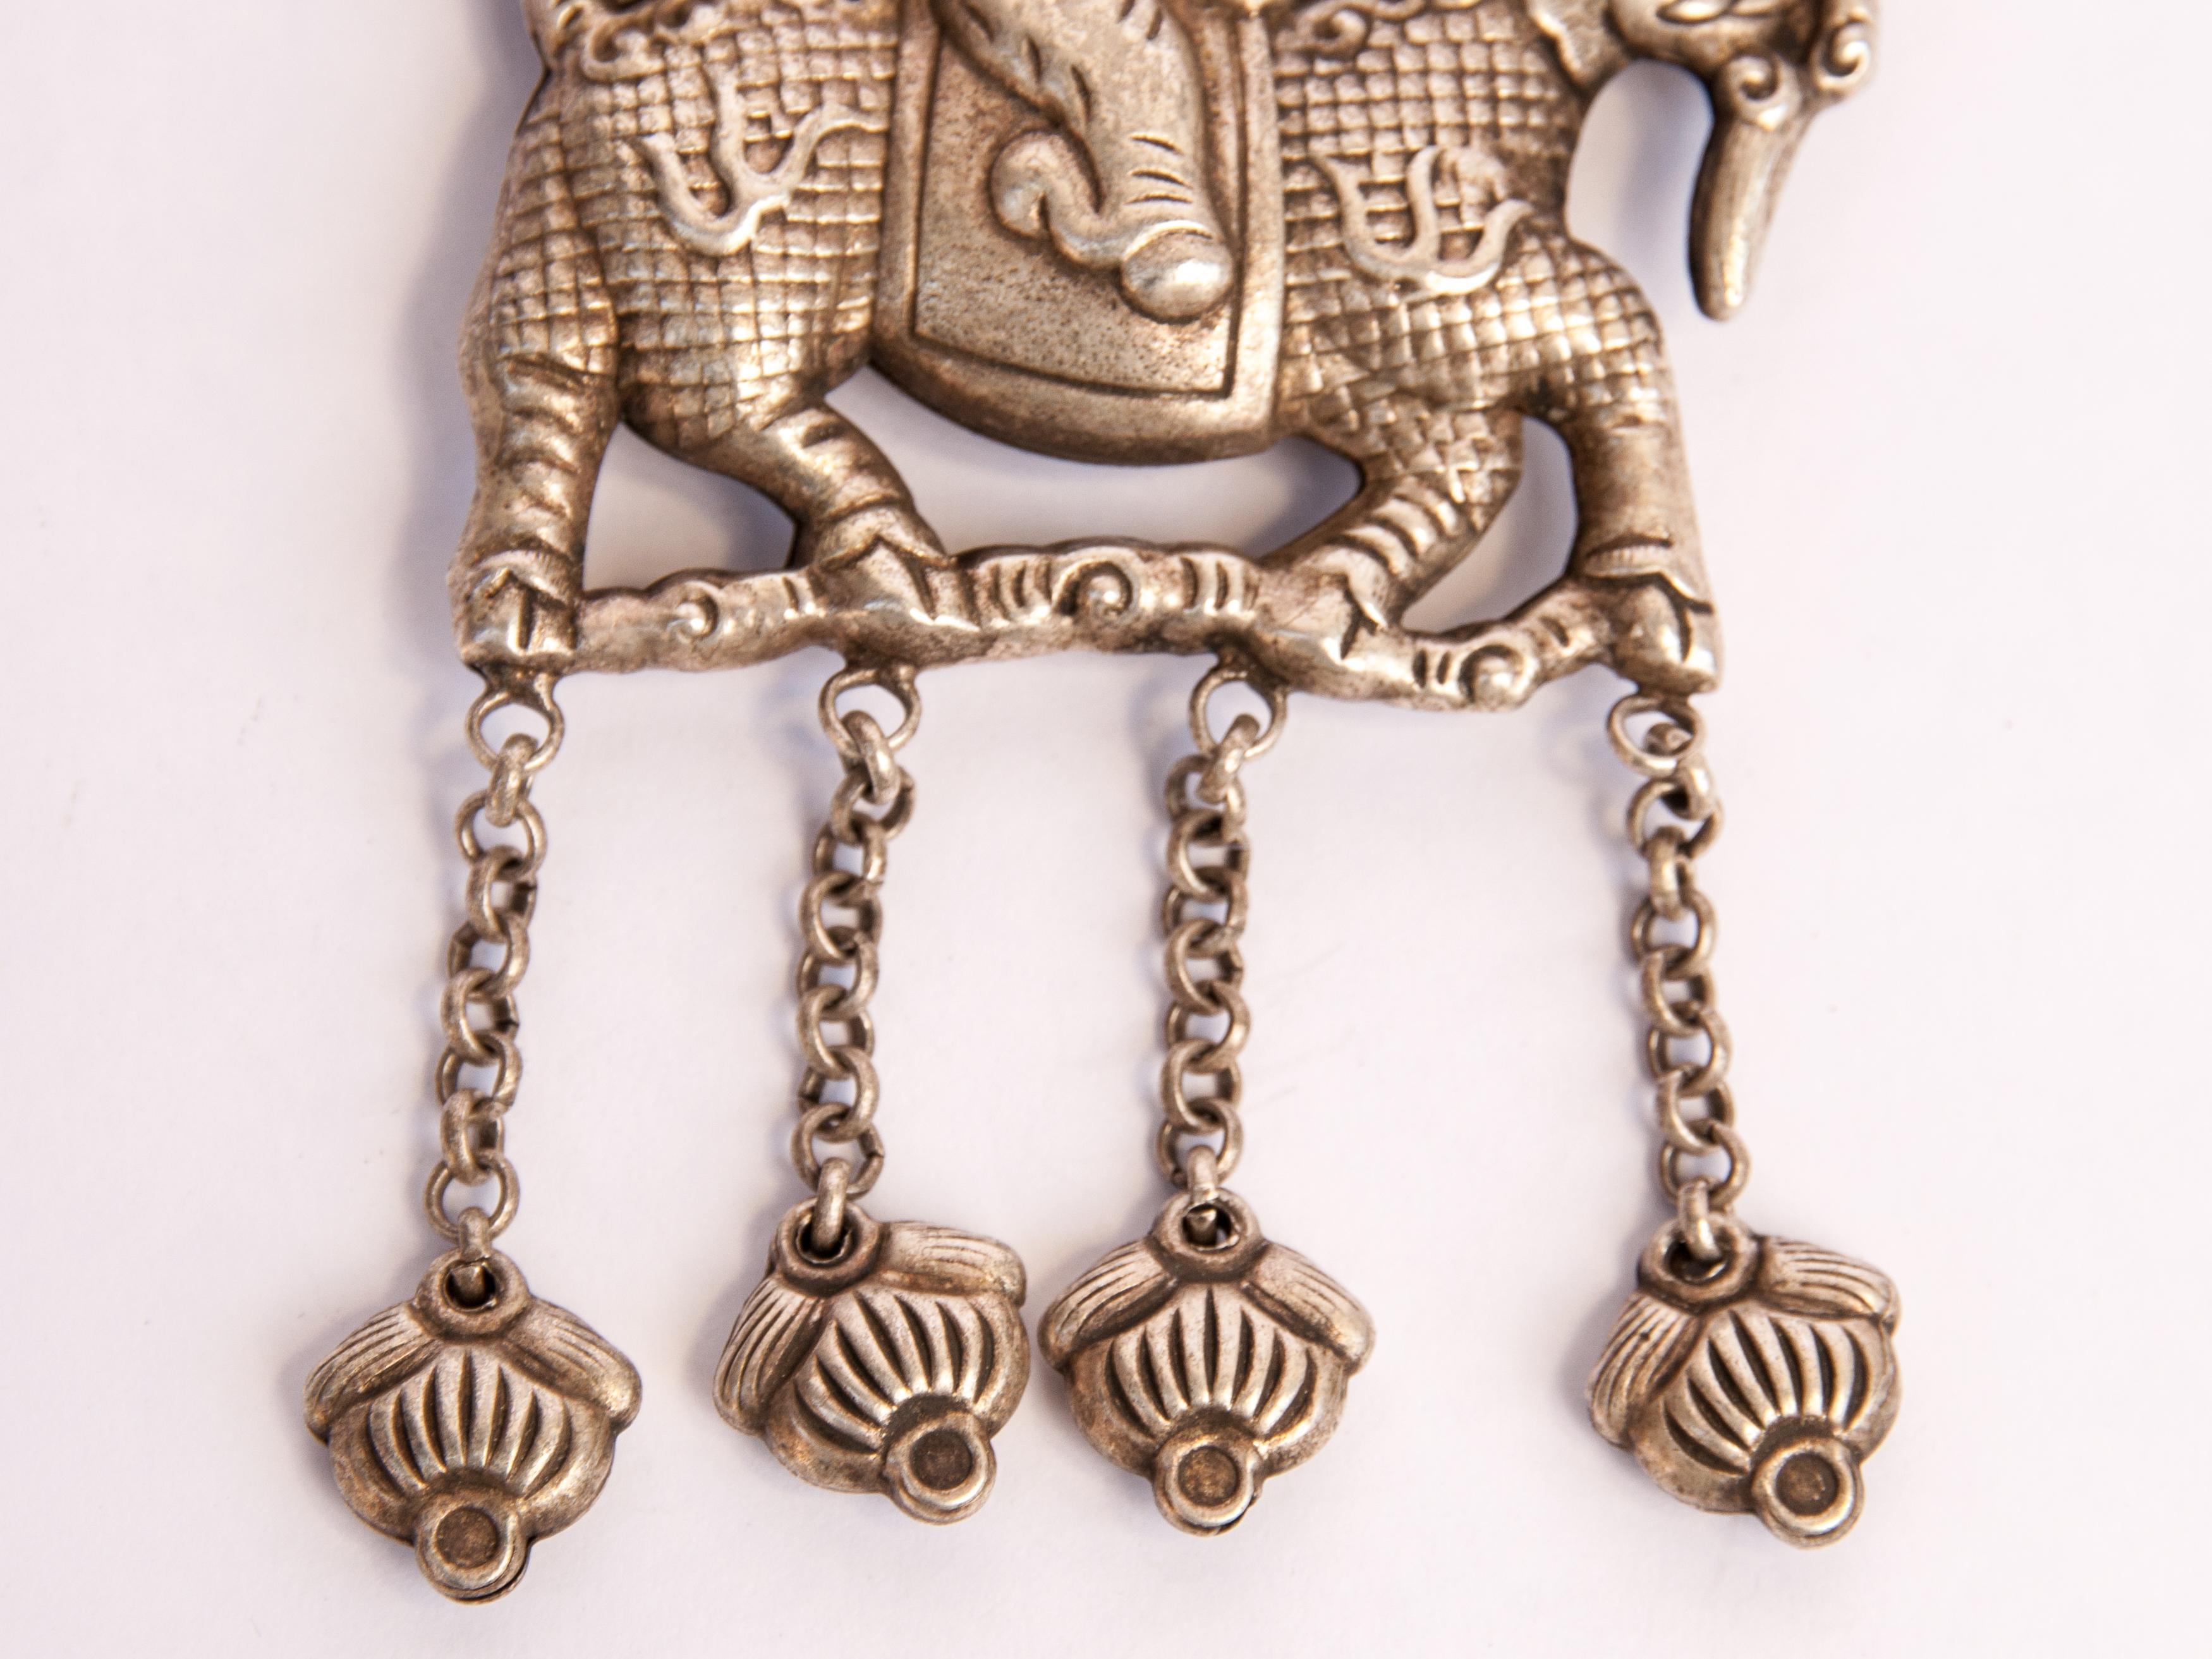 Qilin Amulet Necklace, Silver Alloy, Southwest China, Early 20th Century 2